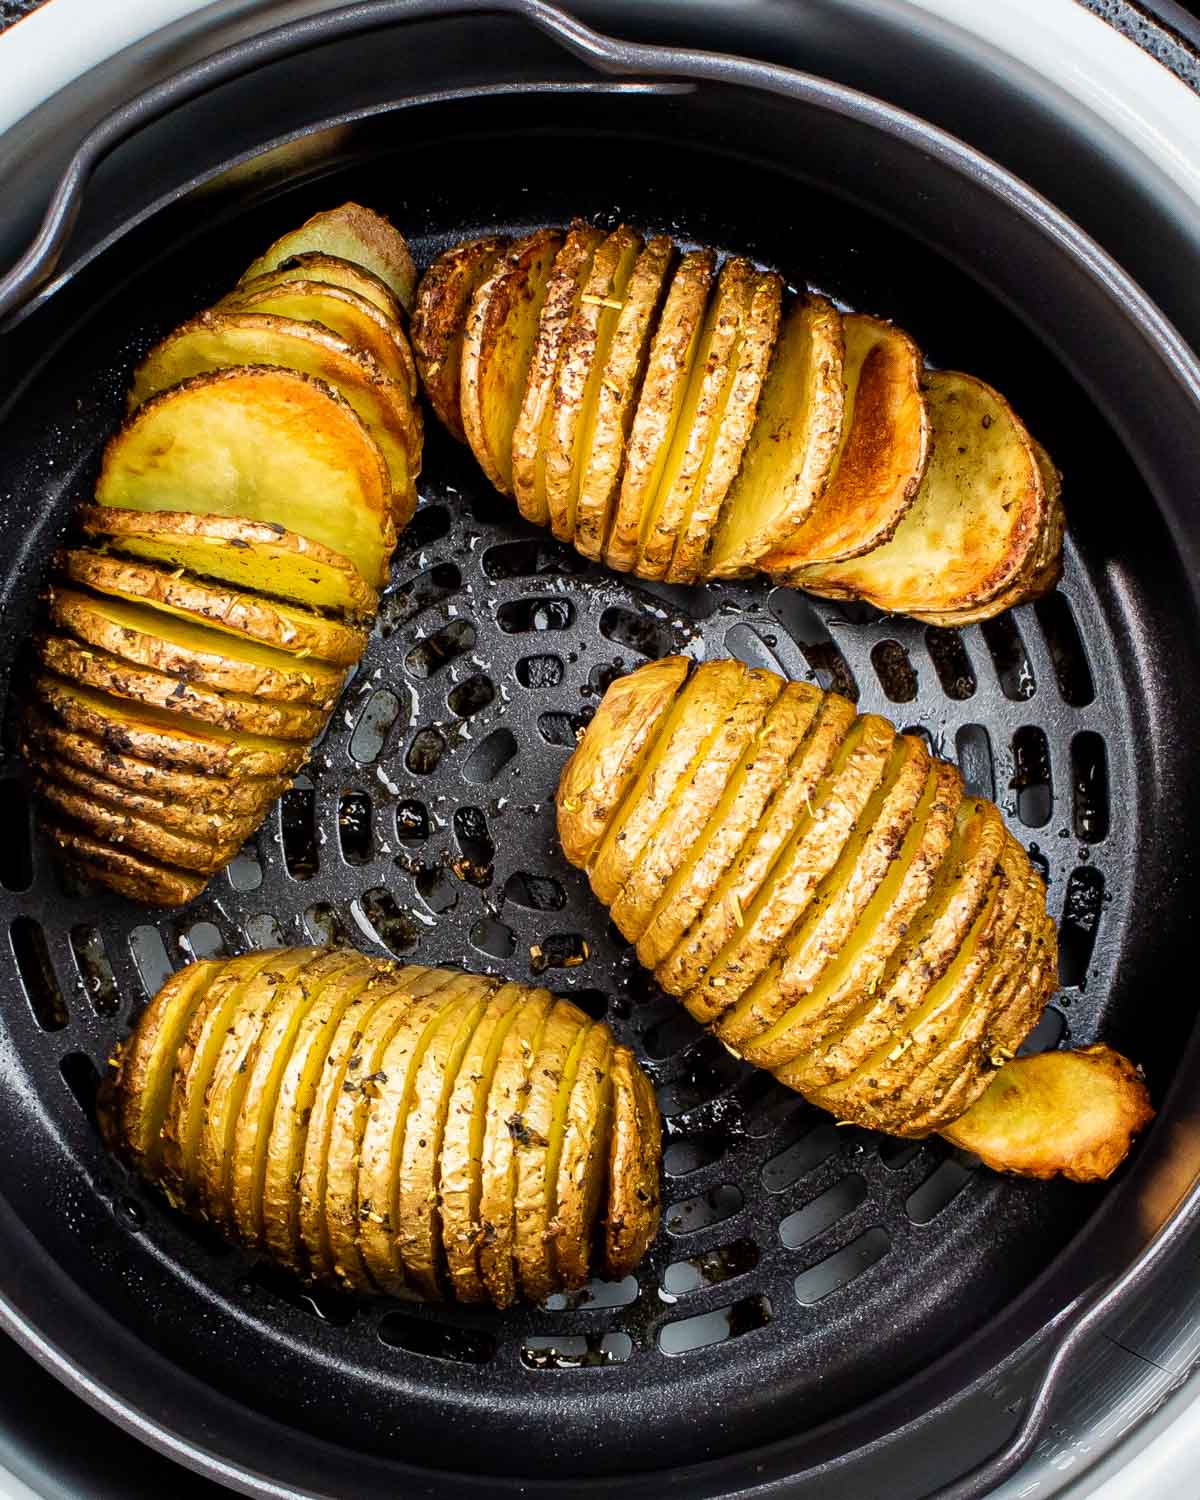 How Long To Cook Potatoes In The Air Fryer